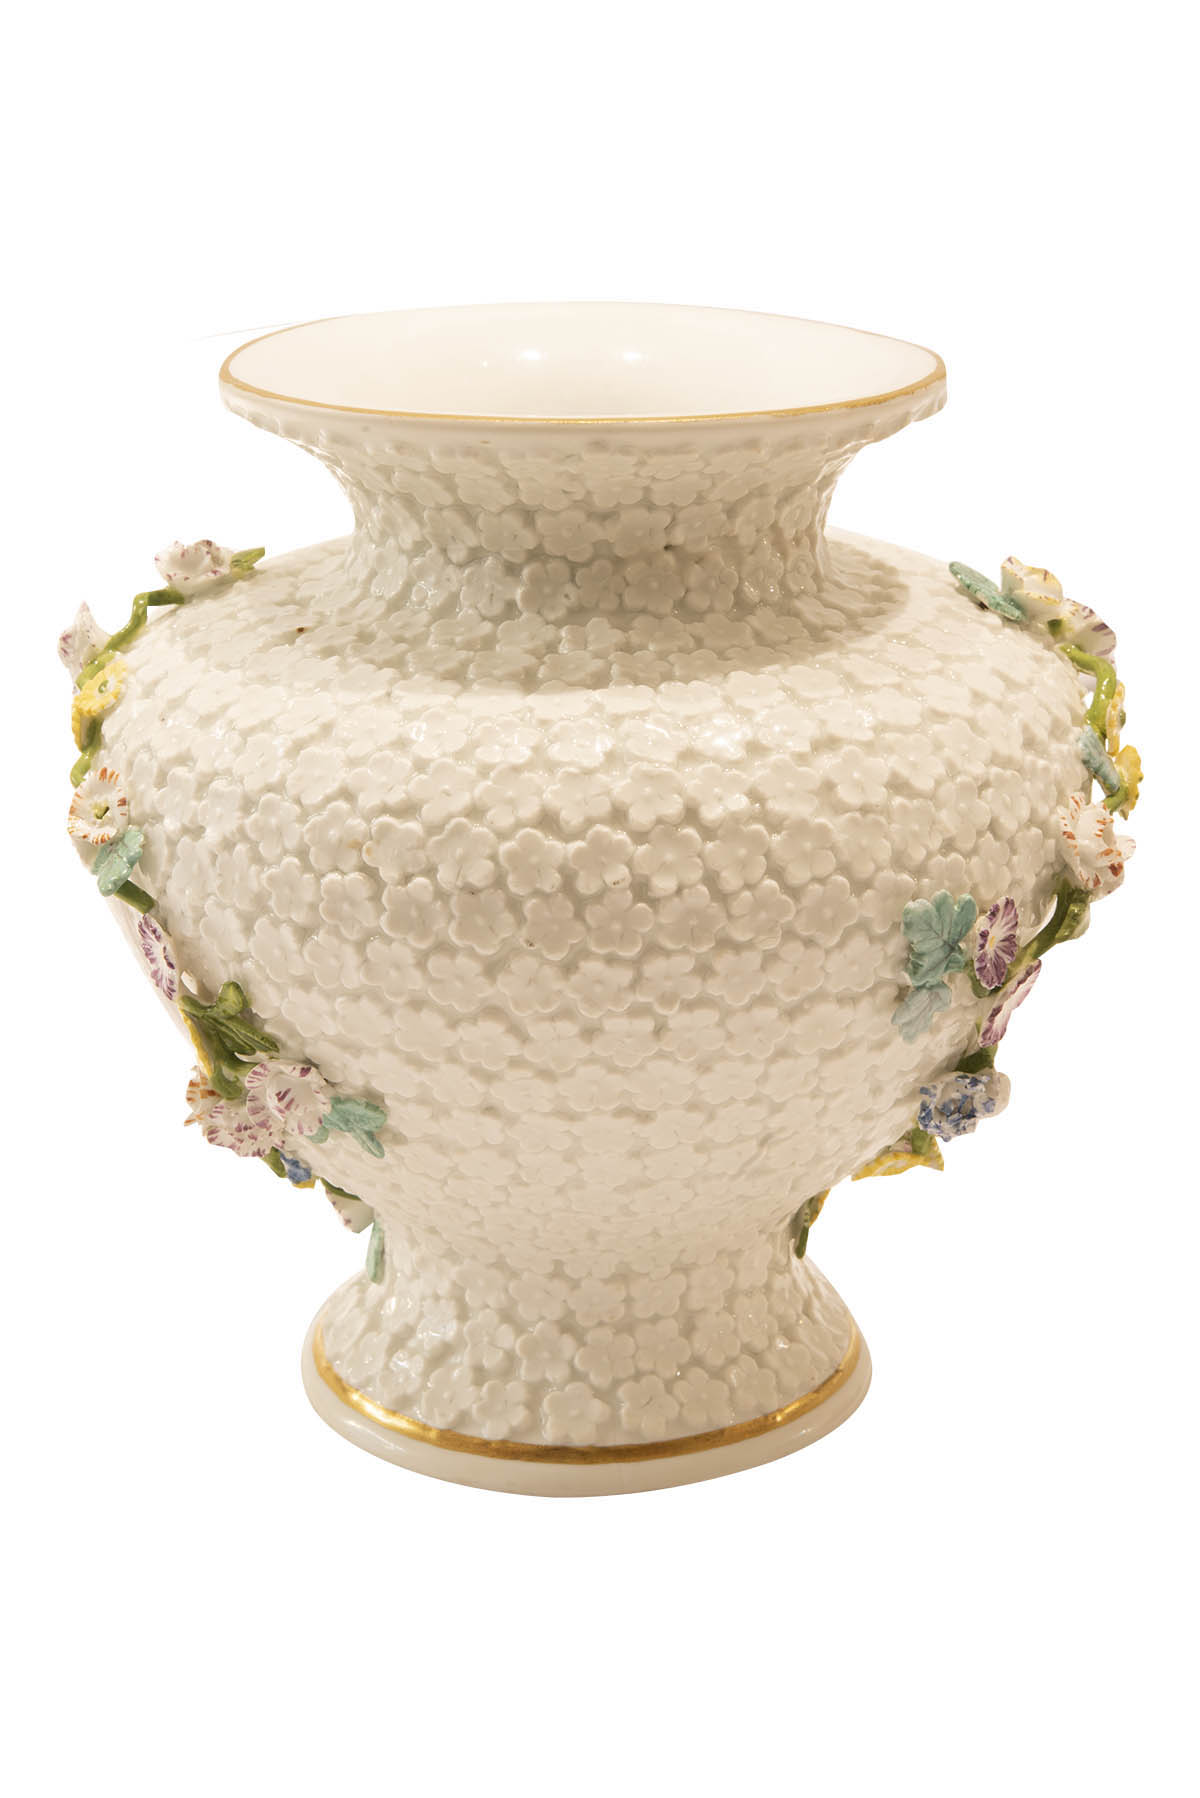 Ornamental vase with forget-me-not decor, Meissen 1740 - Image 2 of 6